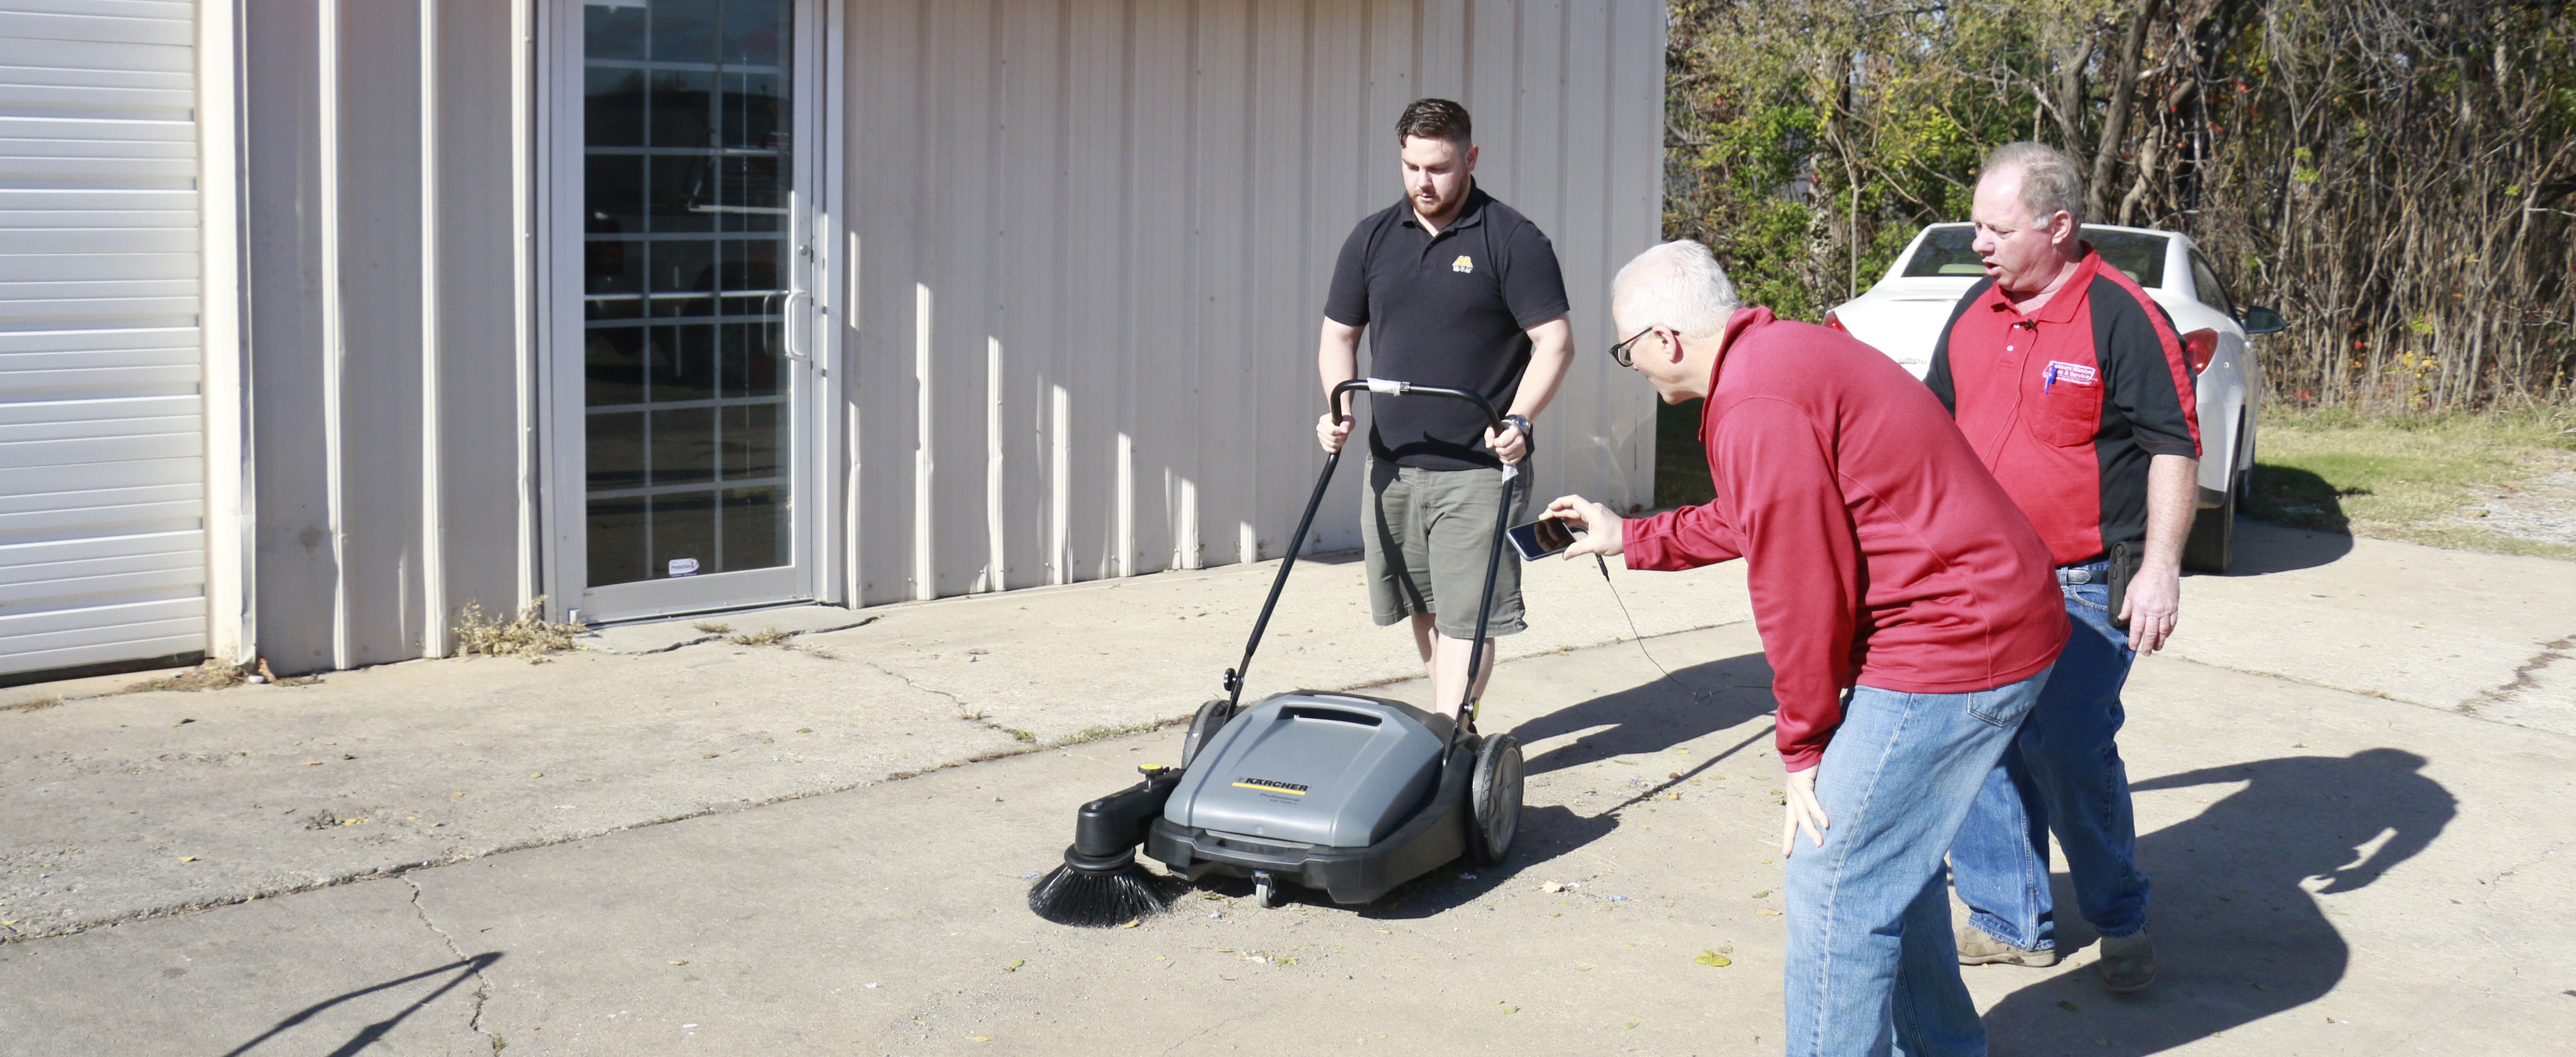 Pressure Washer Sales & Service Tips Training